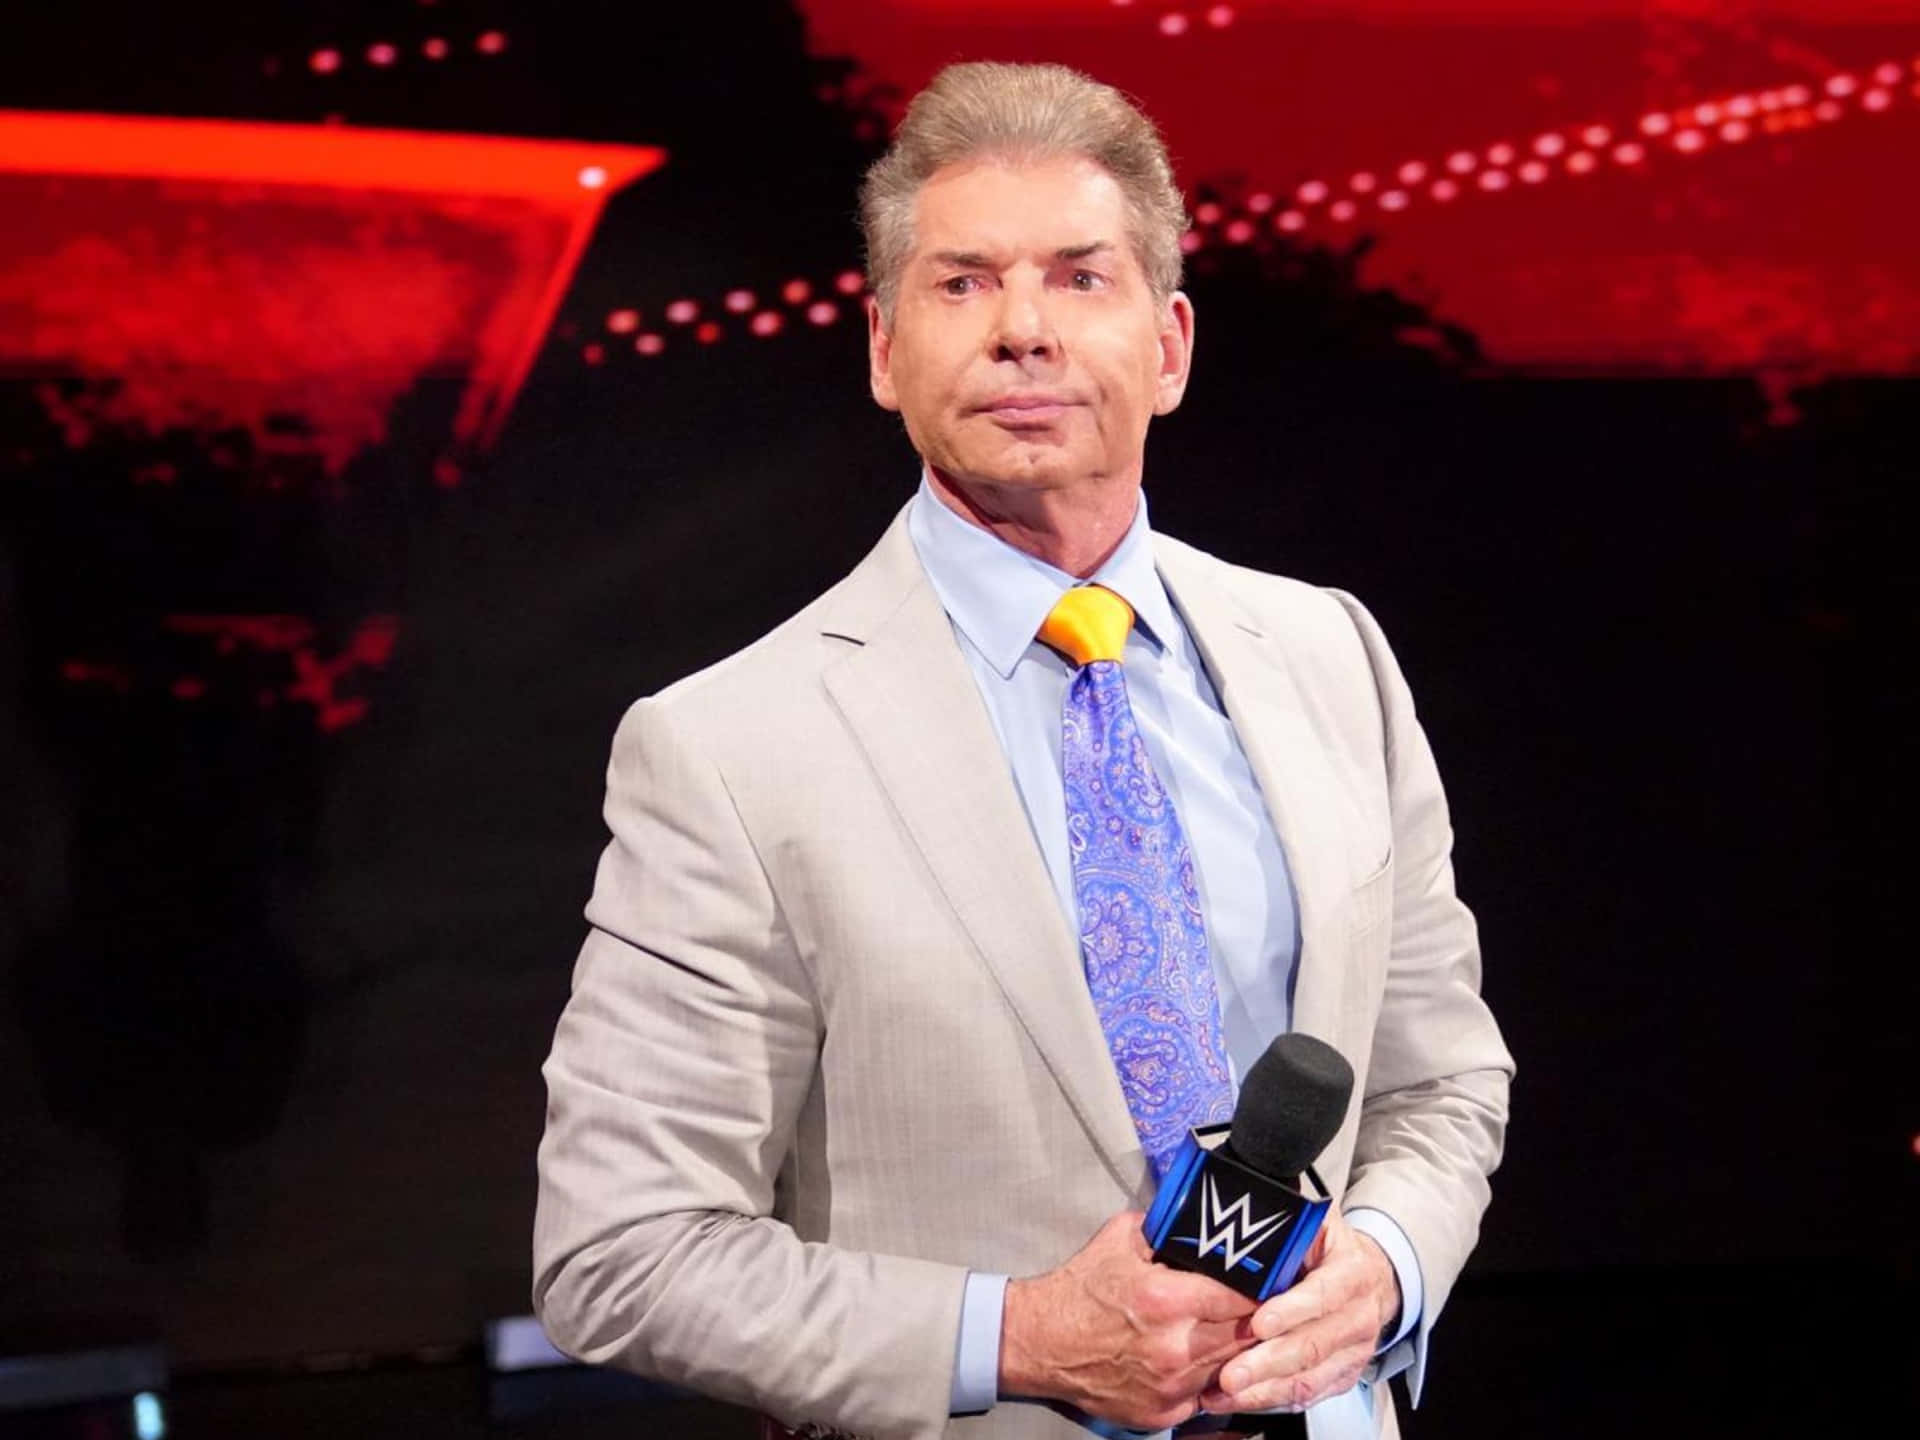 Wwe Commentator Vince Mcmahon Background